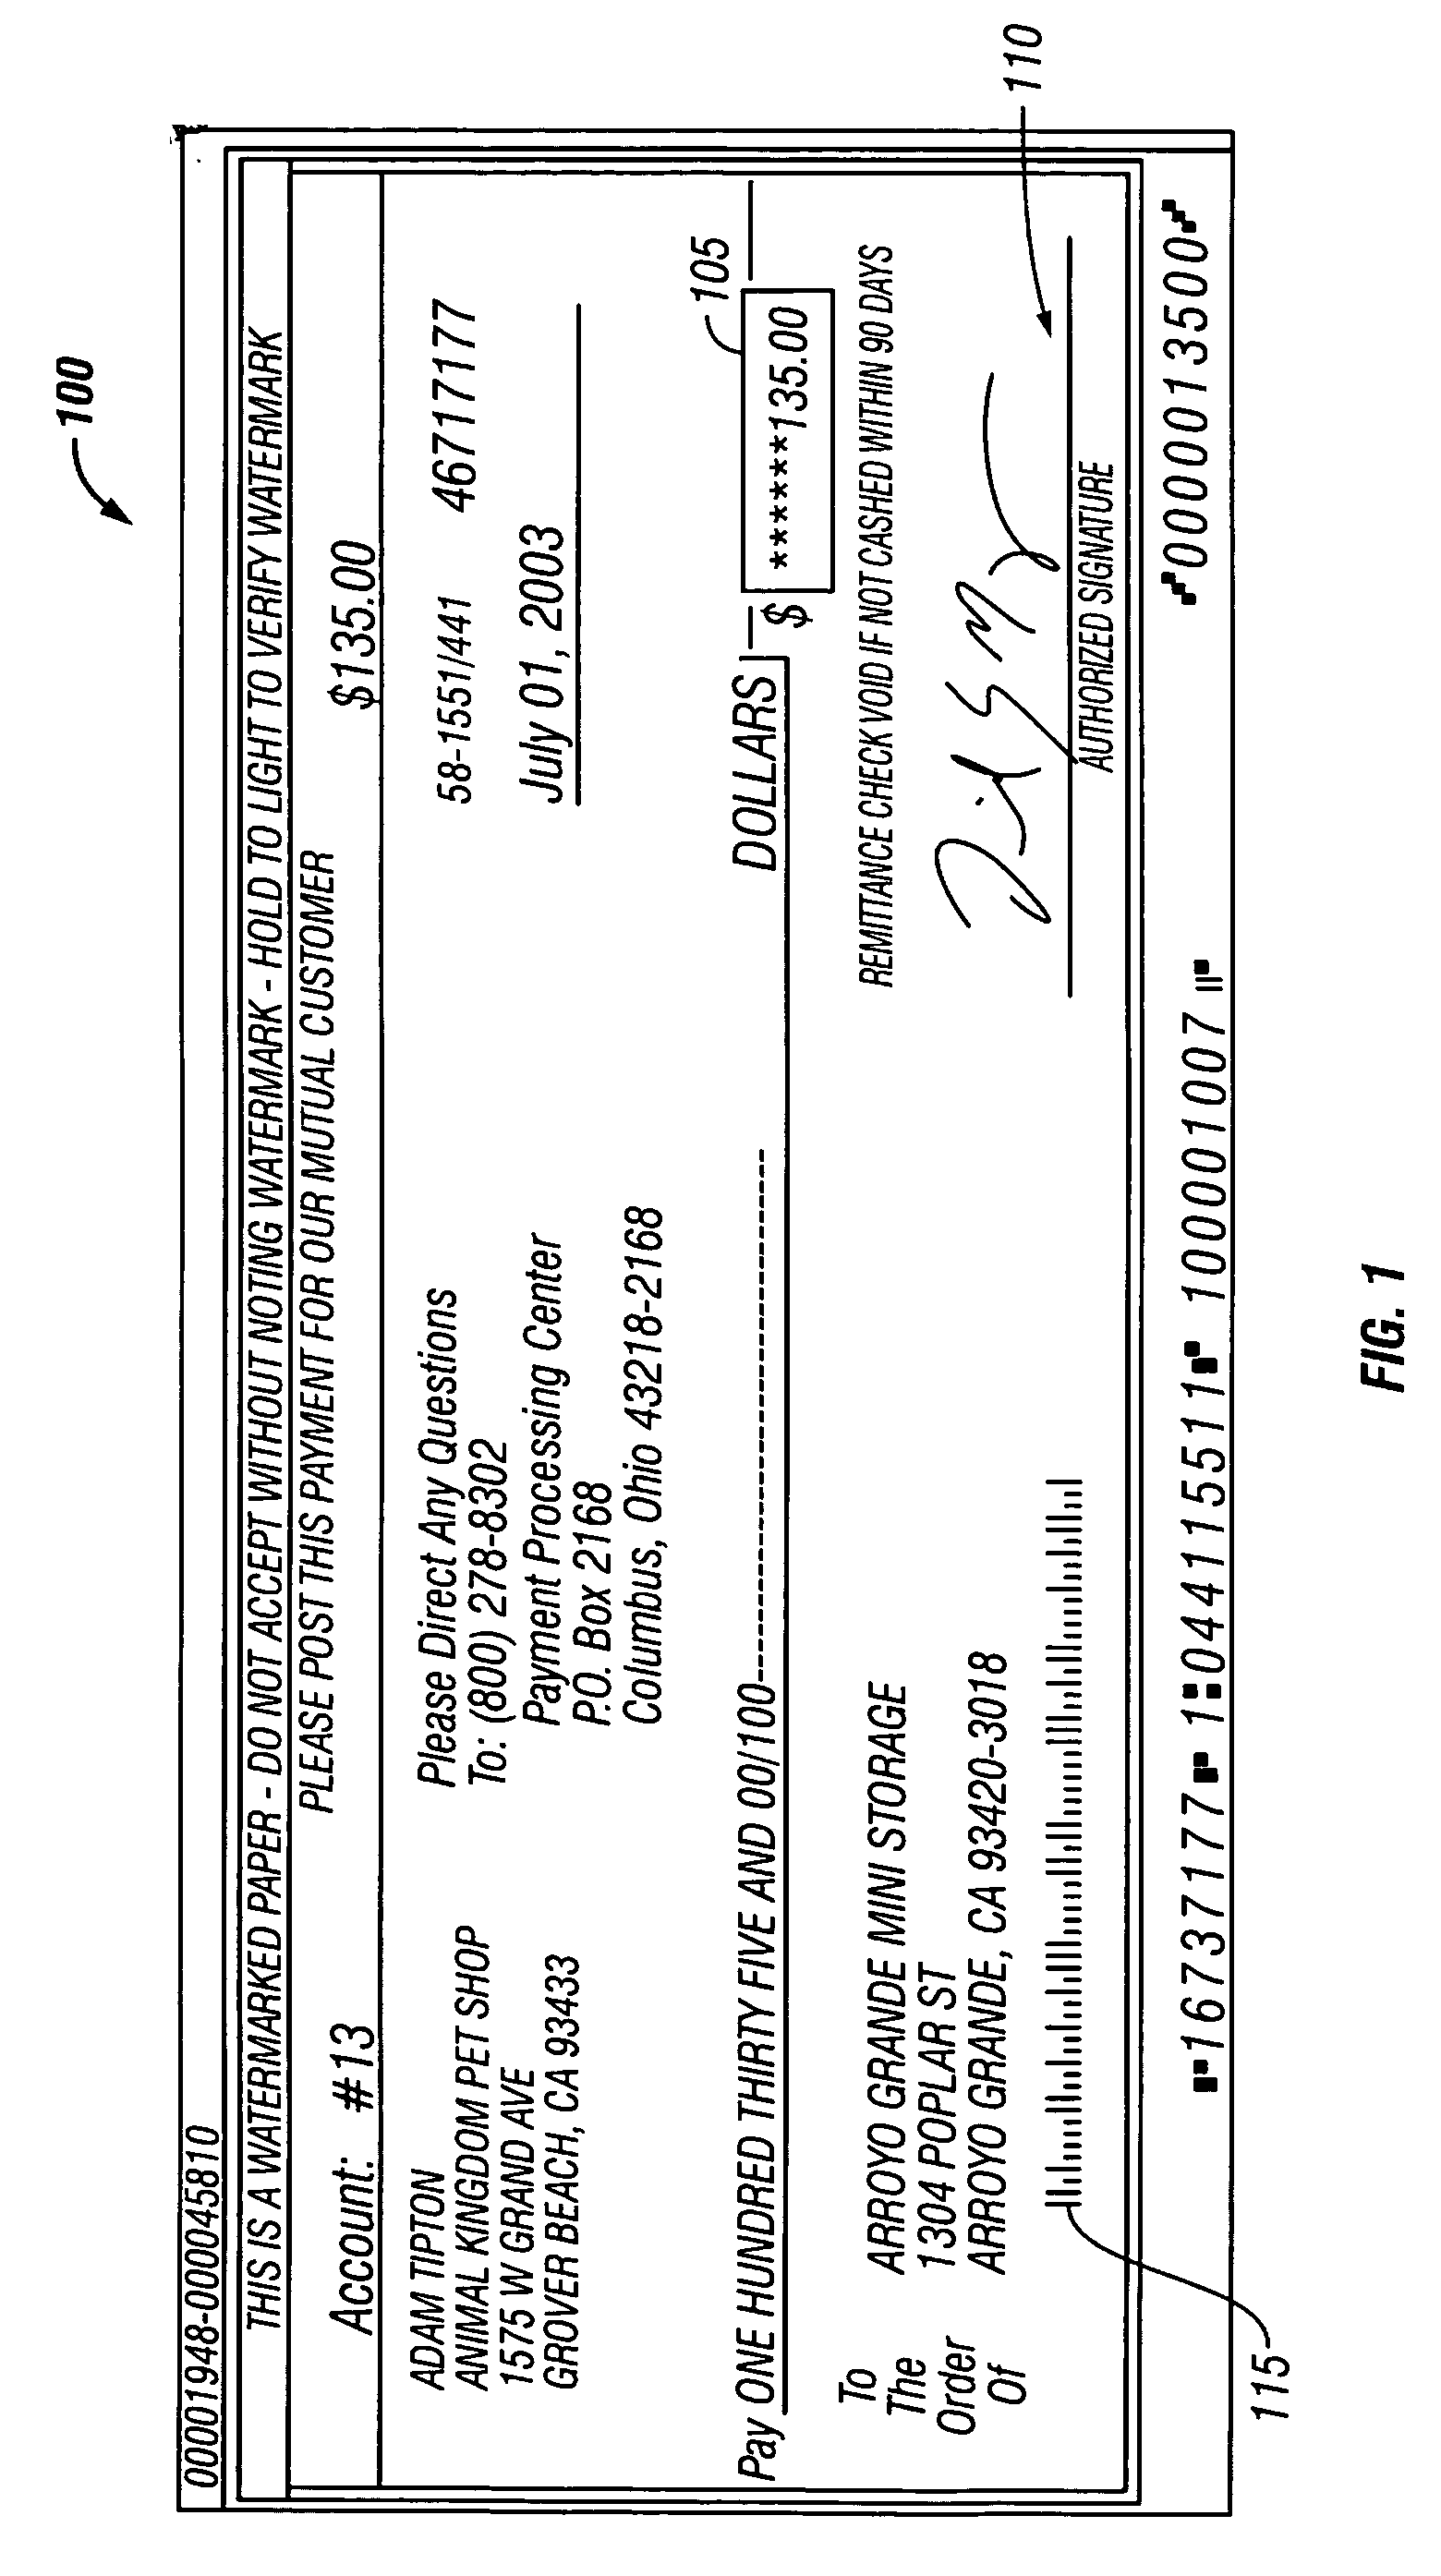 System and method for check fraud detection using signature validation